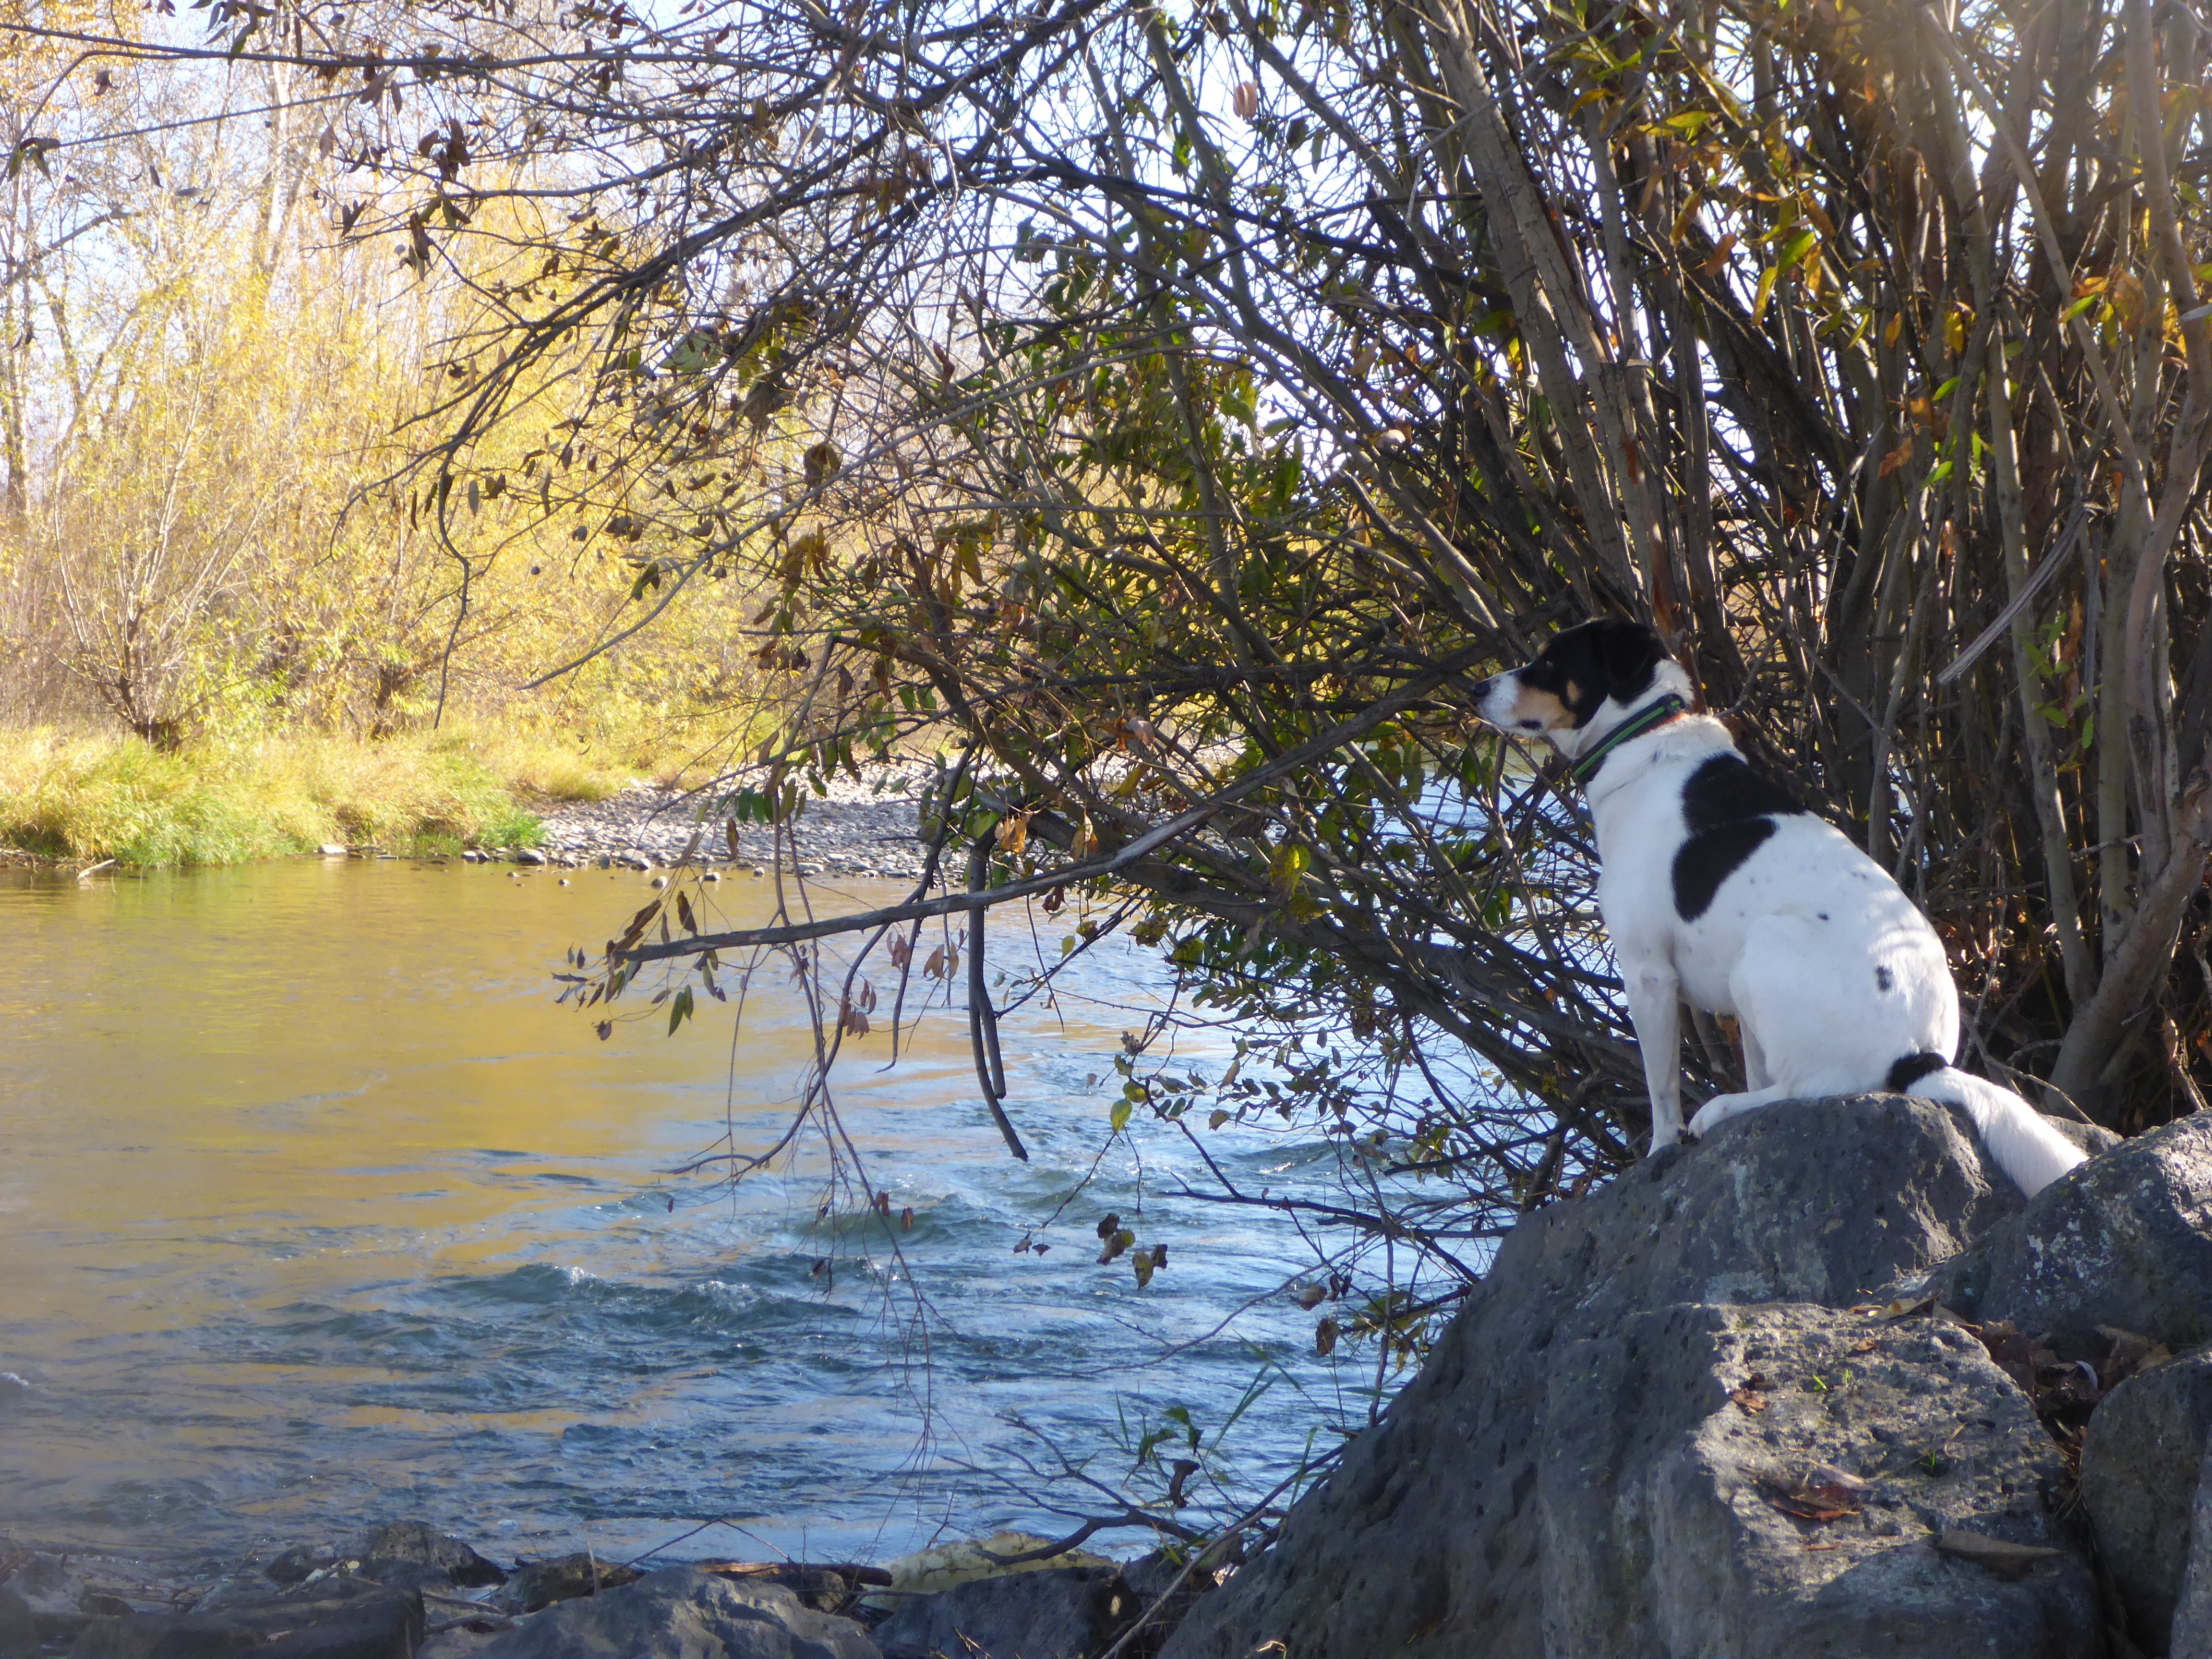 Some sights along the bike/hiking trail along the Boise River.